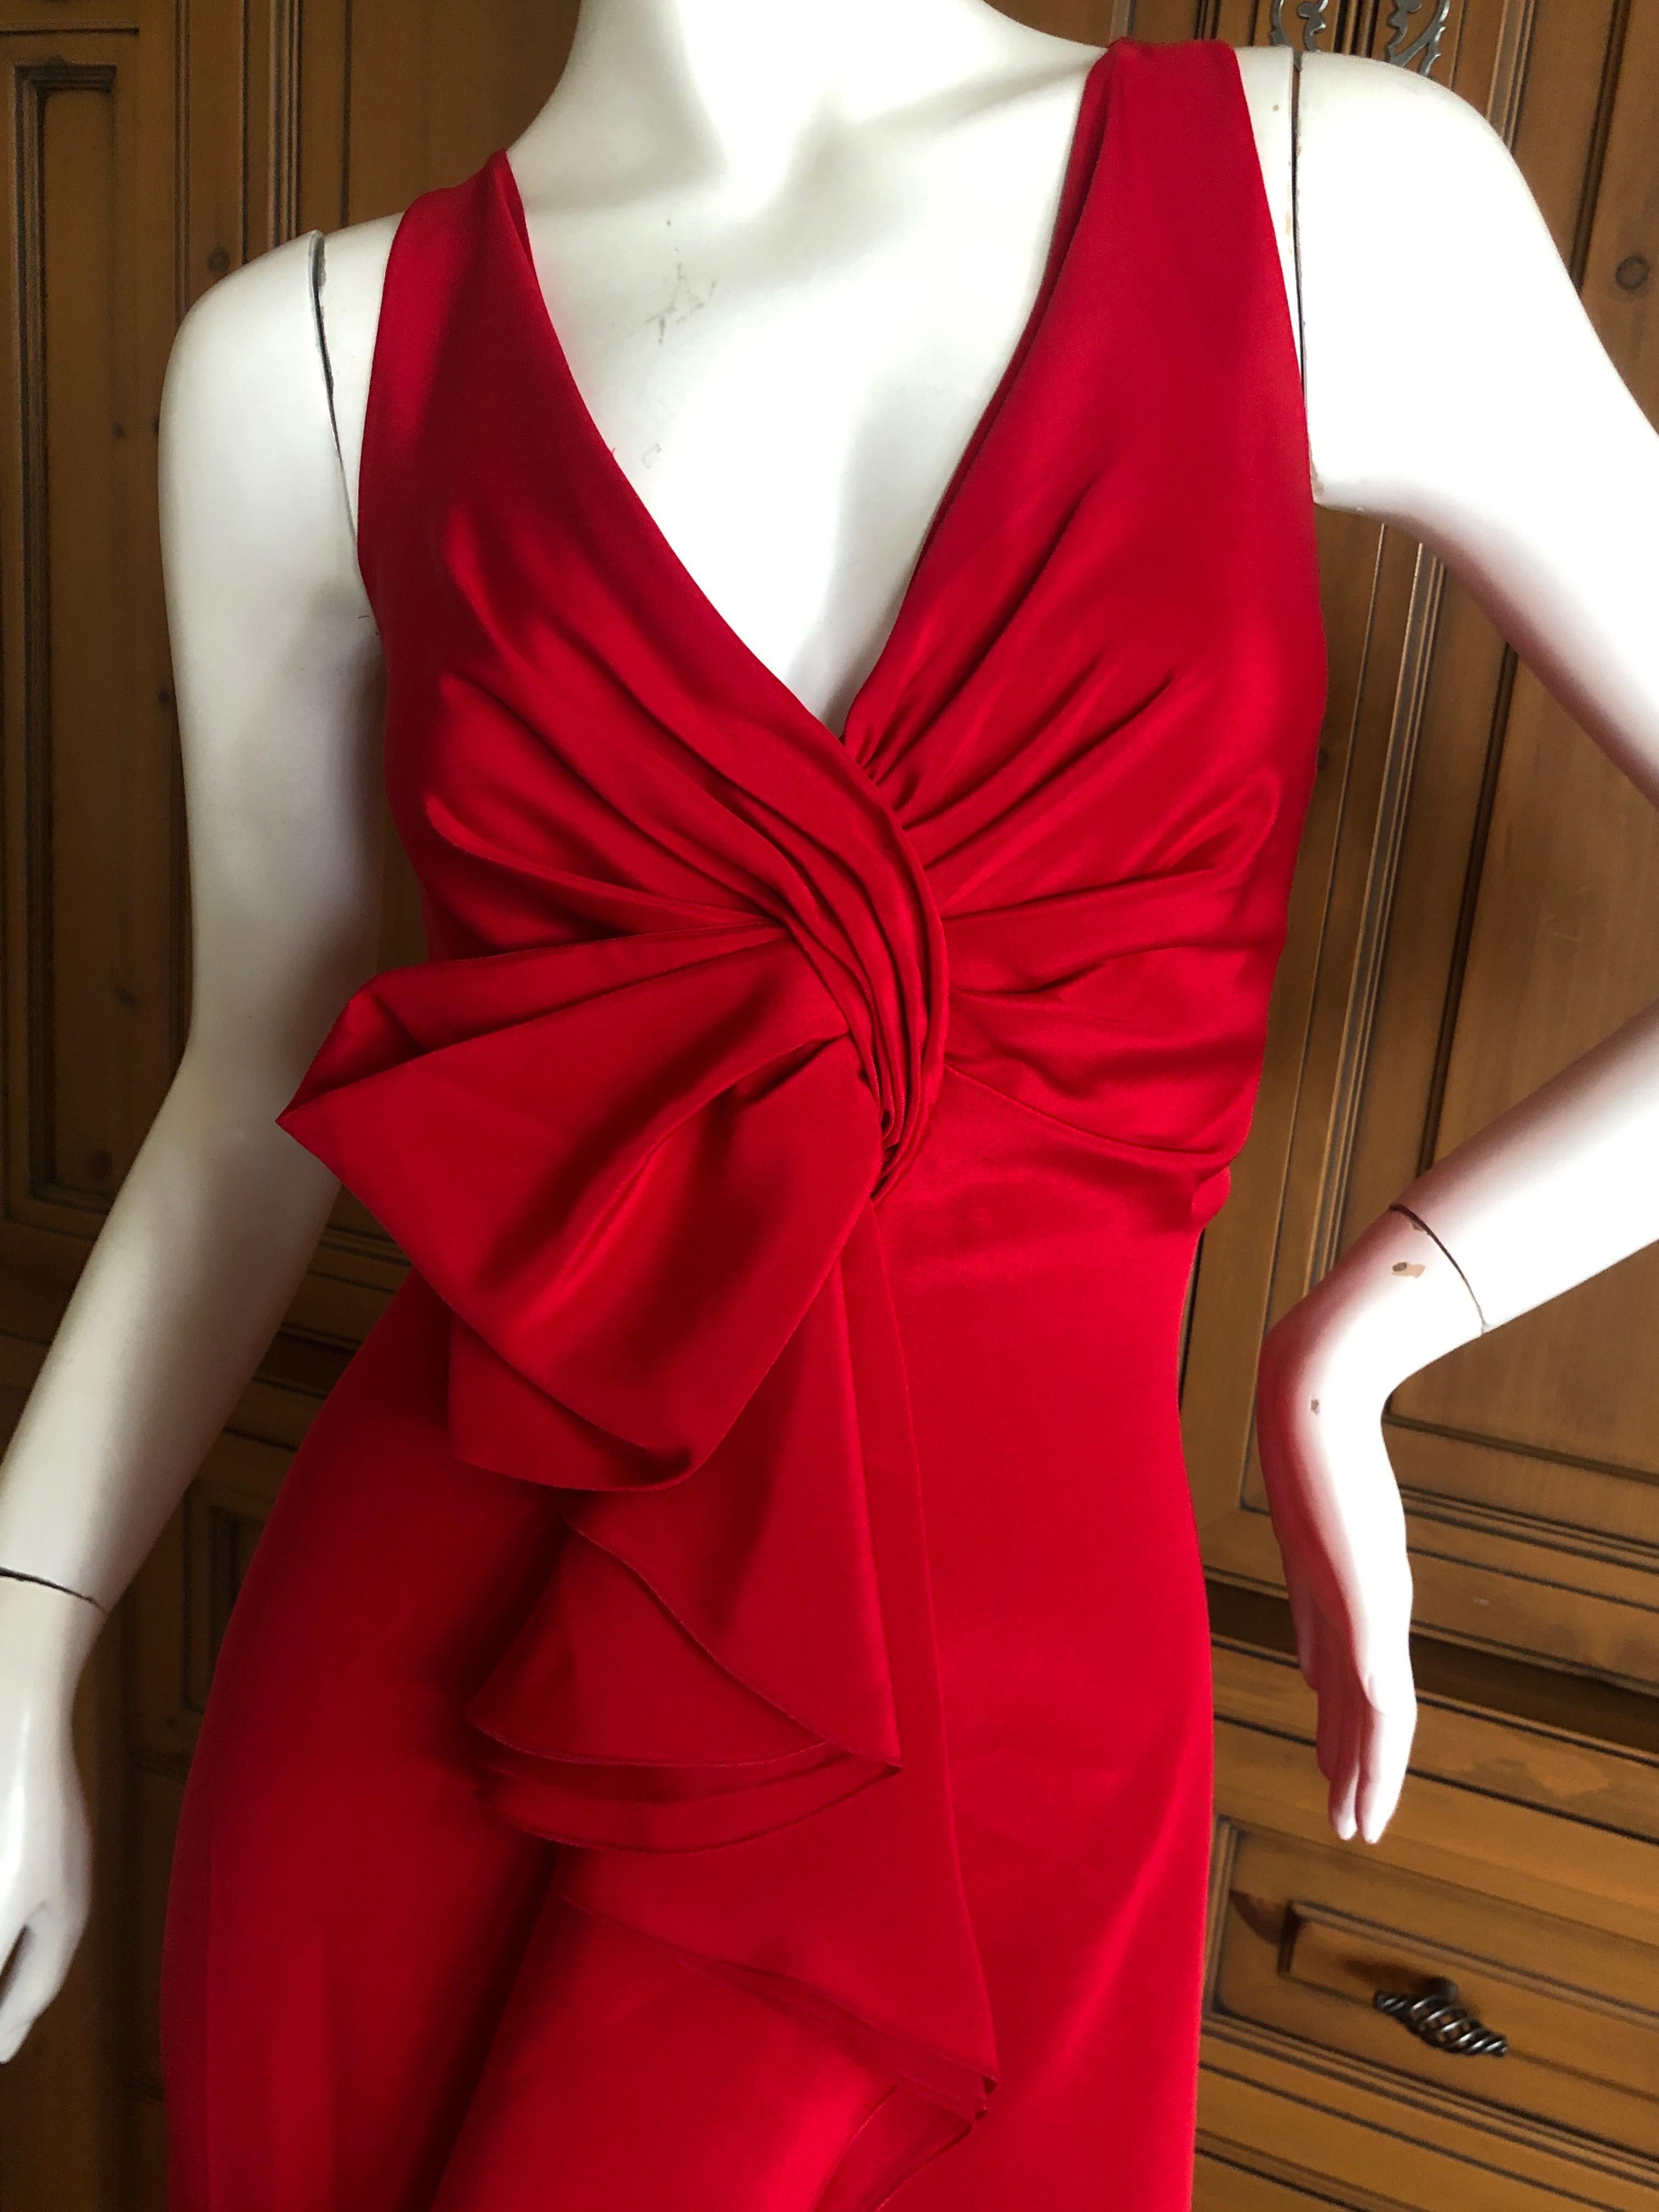 Valentino Vintage Signature Red Low Cut Silk Chiffon Evening Dress with Train In Excellent Condition For Sale In Cloverdale, CA